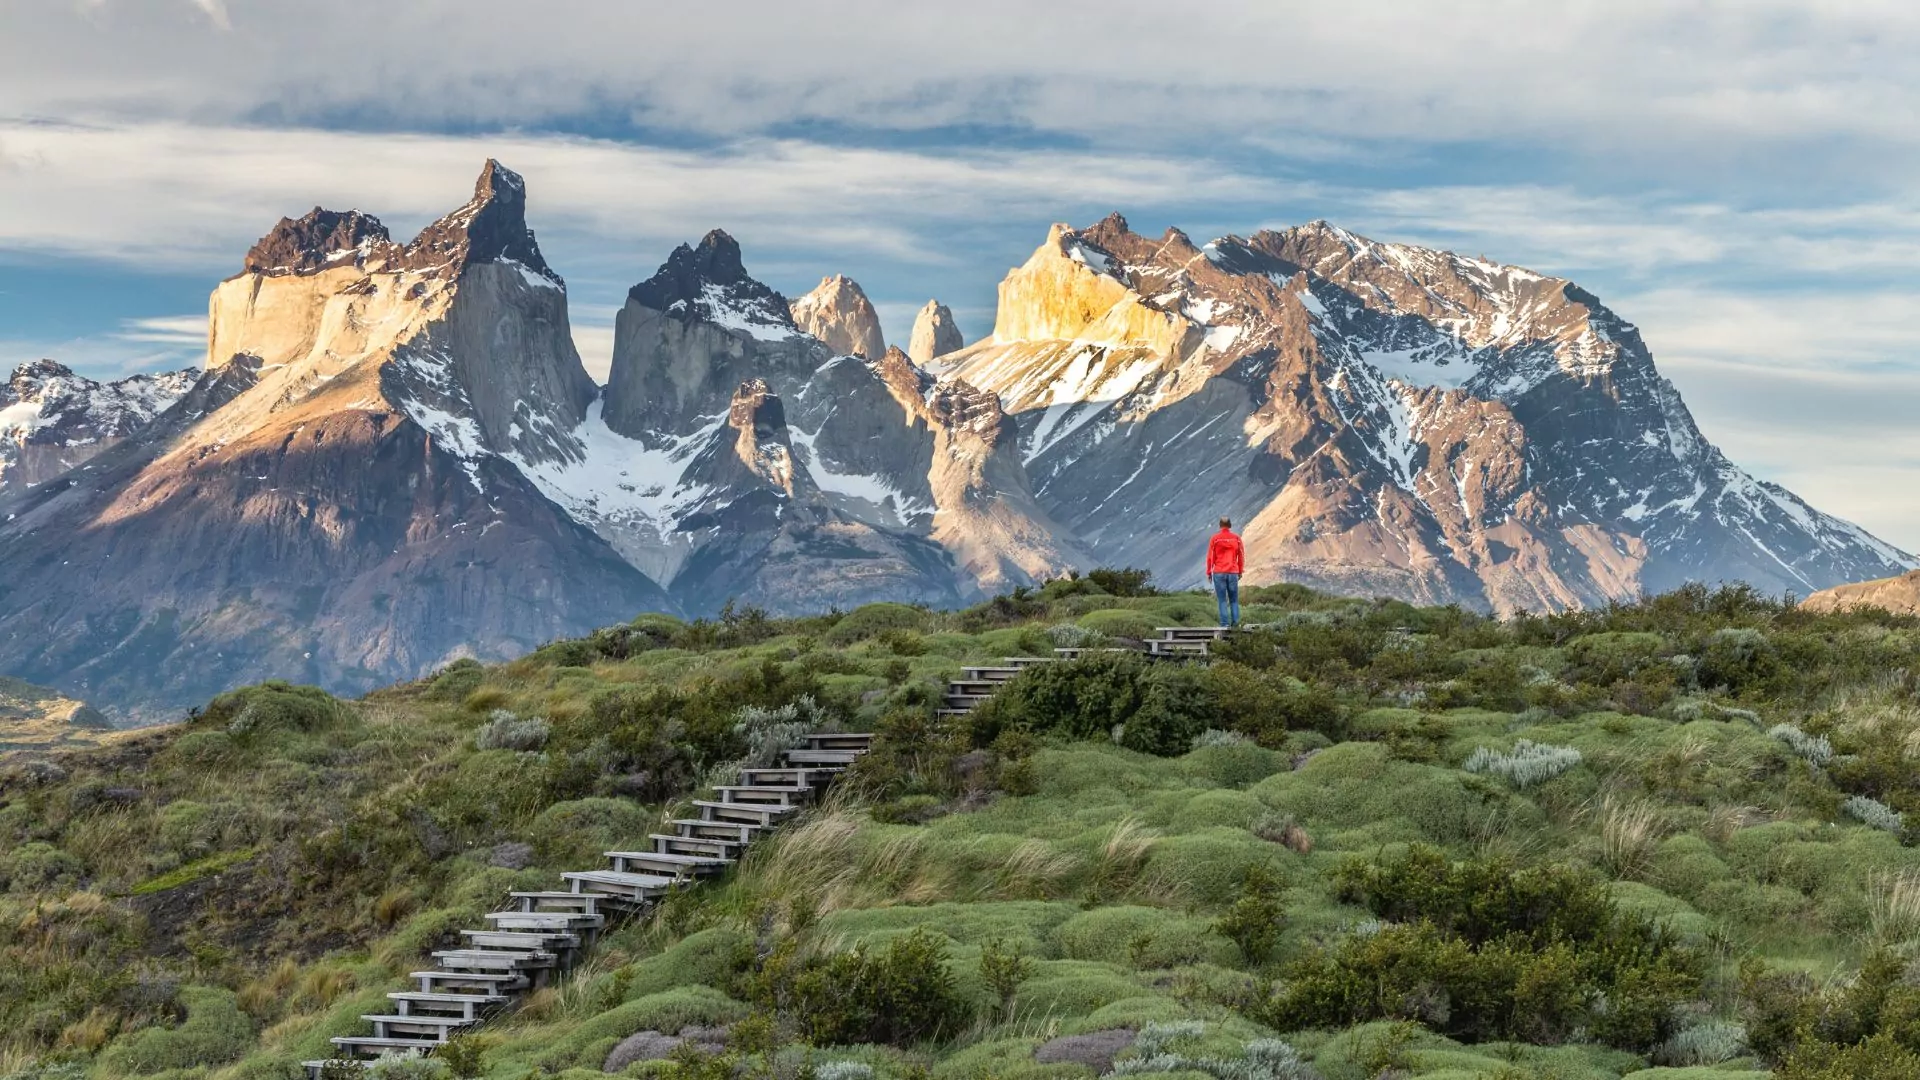 Hiker in a red jacket stands at the end of a boardwalk taking in the rugged snowy mountains of the Torres del Paine in the distance